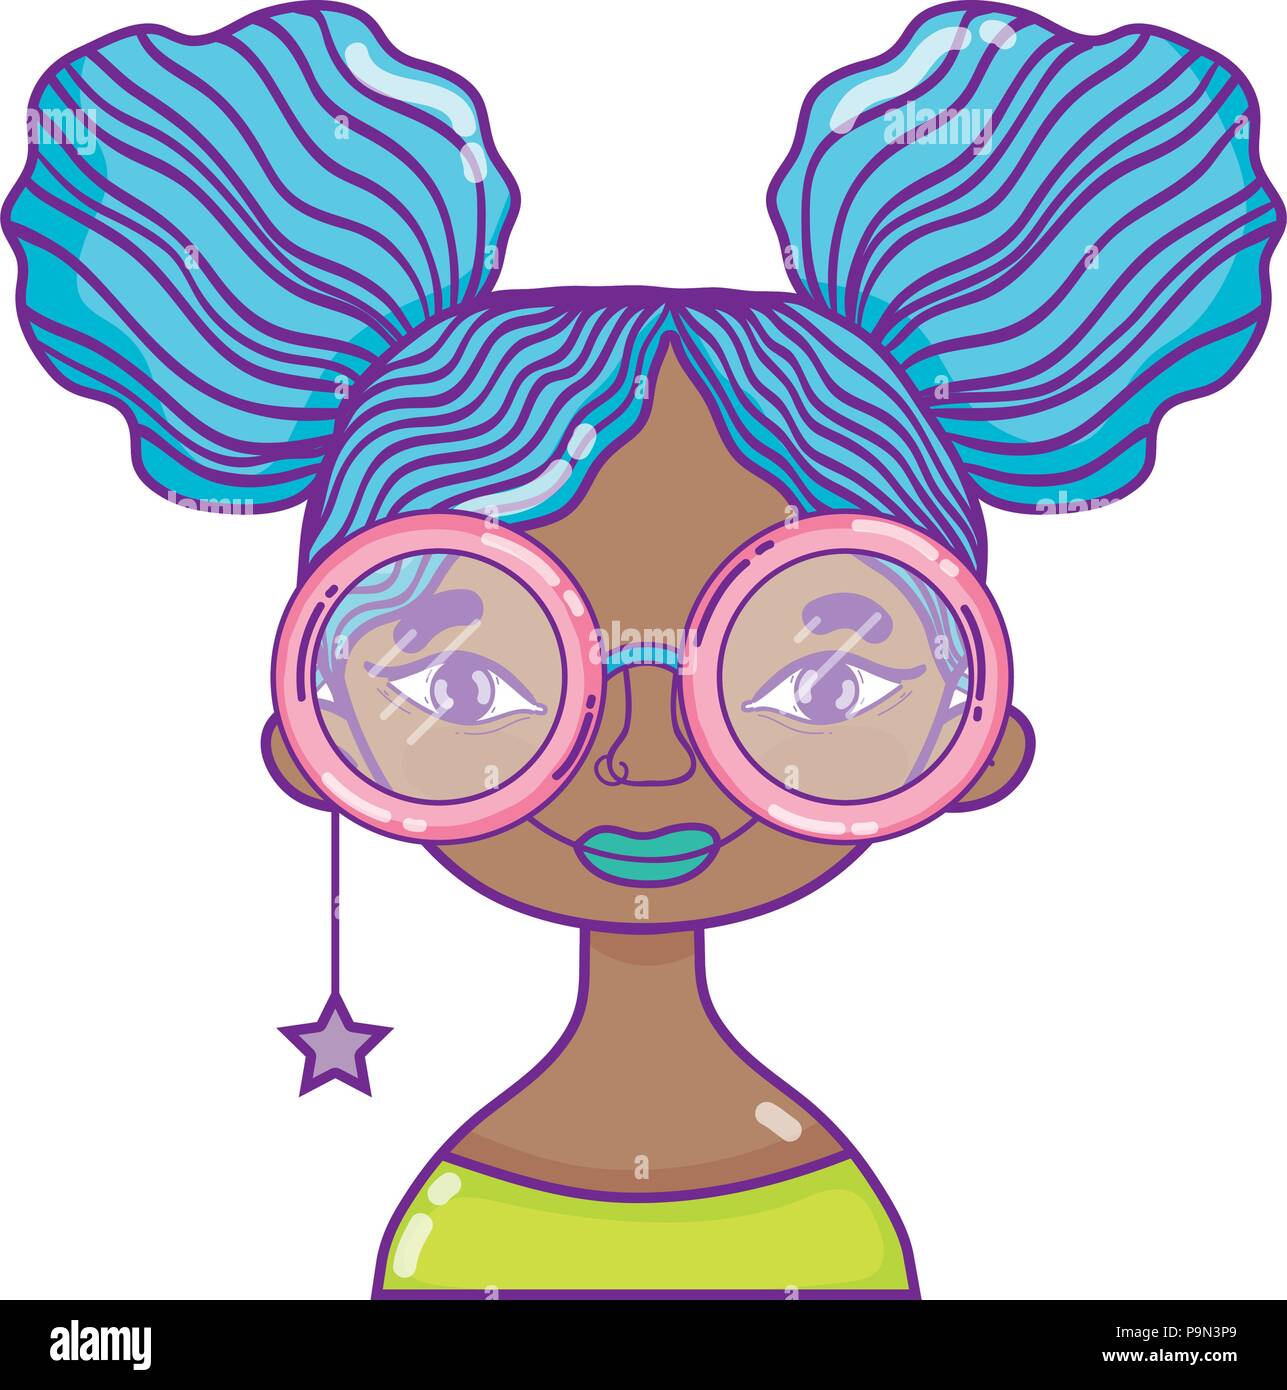 woman hairstyle with glasses and star earring Stock Vector